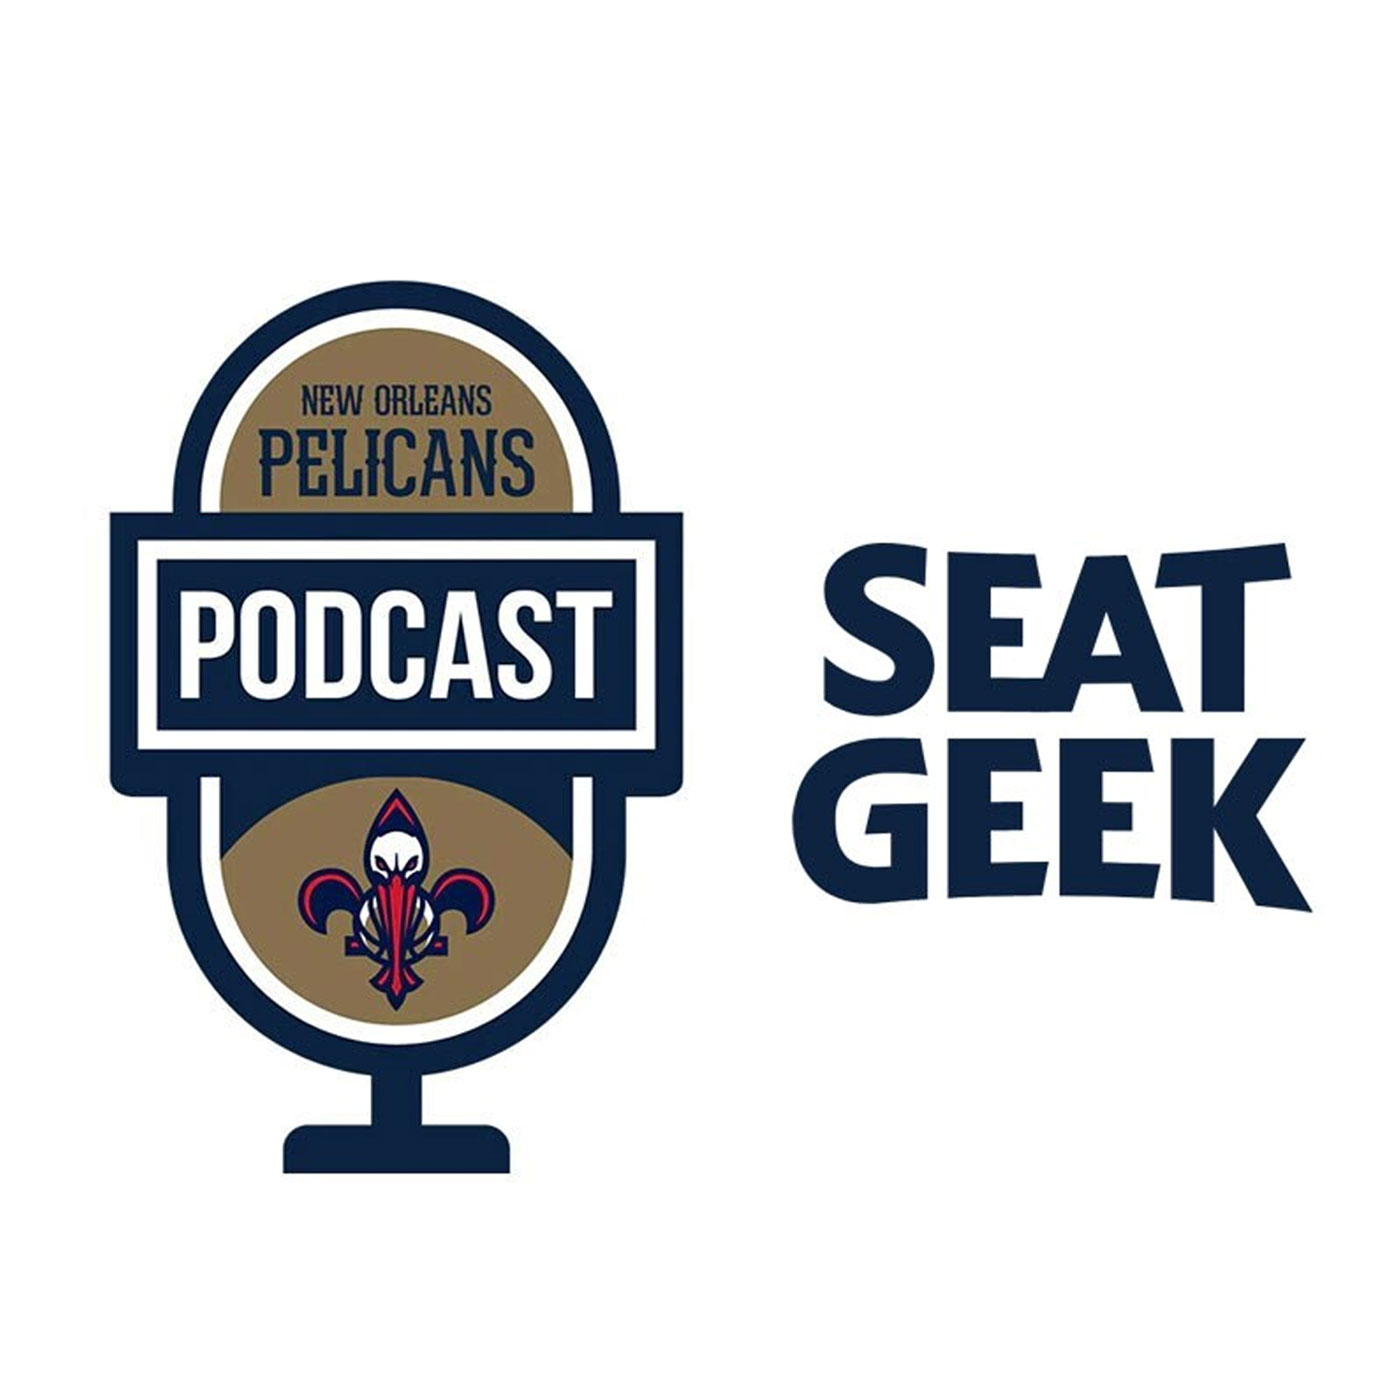 Andrew Lopez on the New Orleans Pelicans Podcast presented by SeatGeek - December 15, 2021